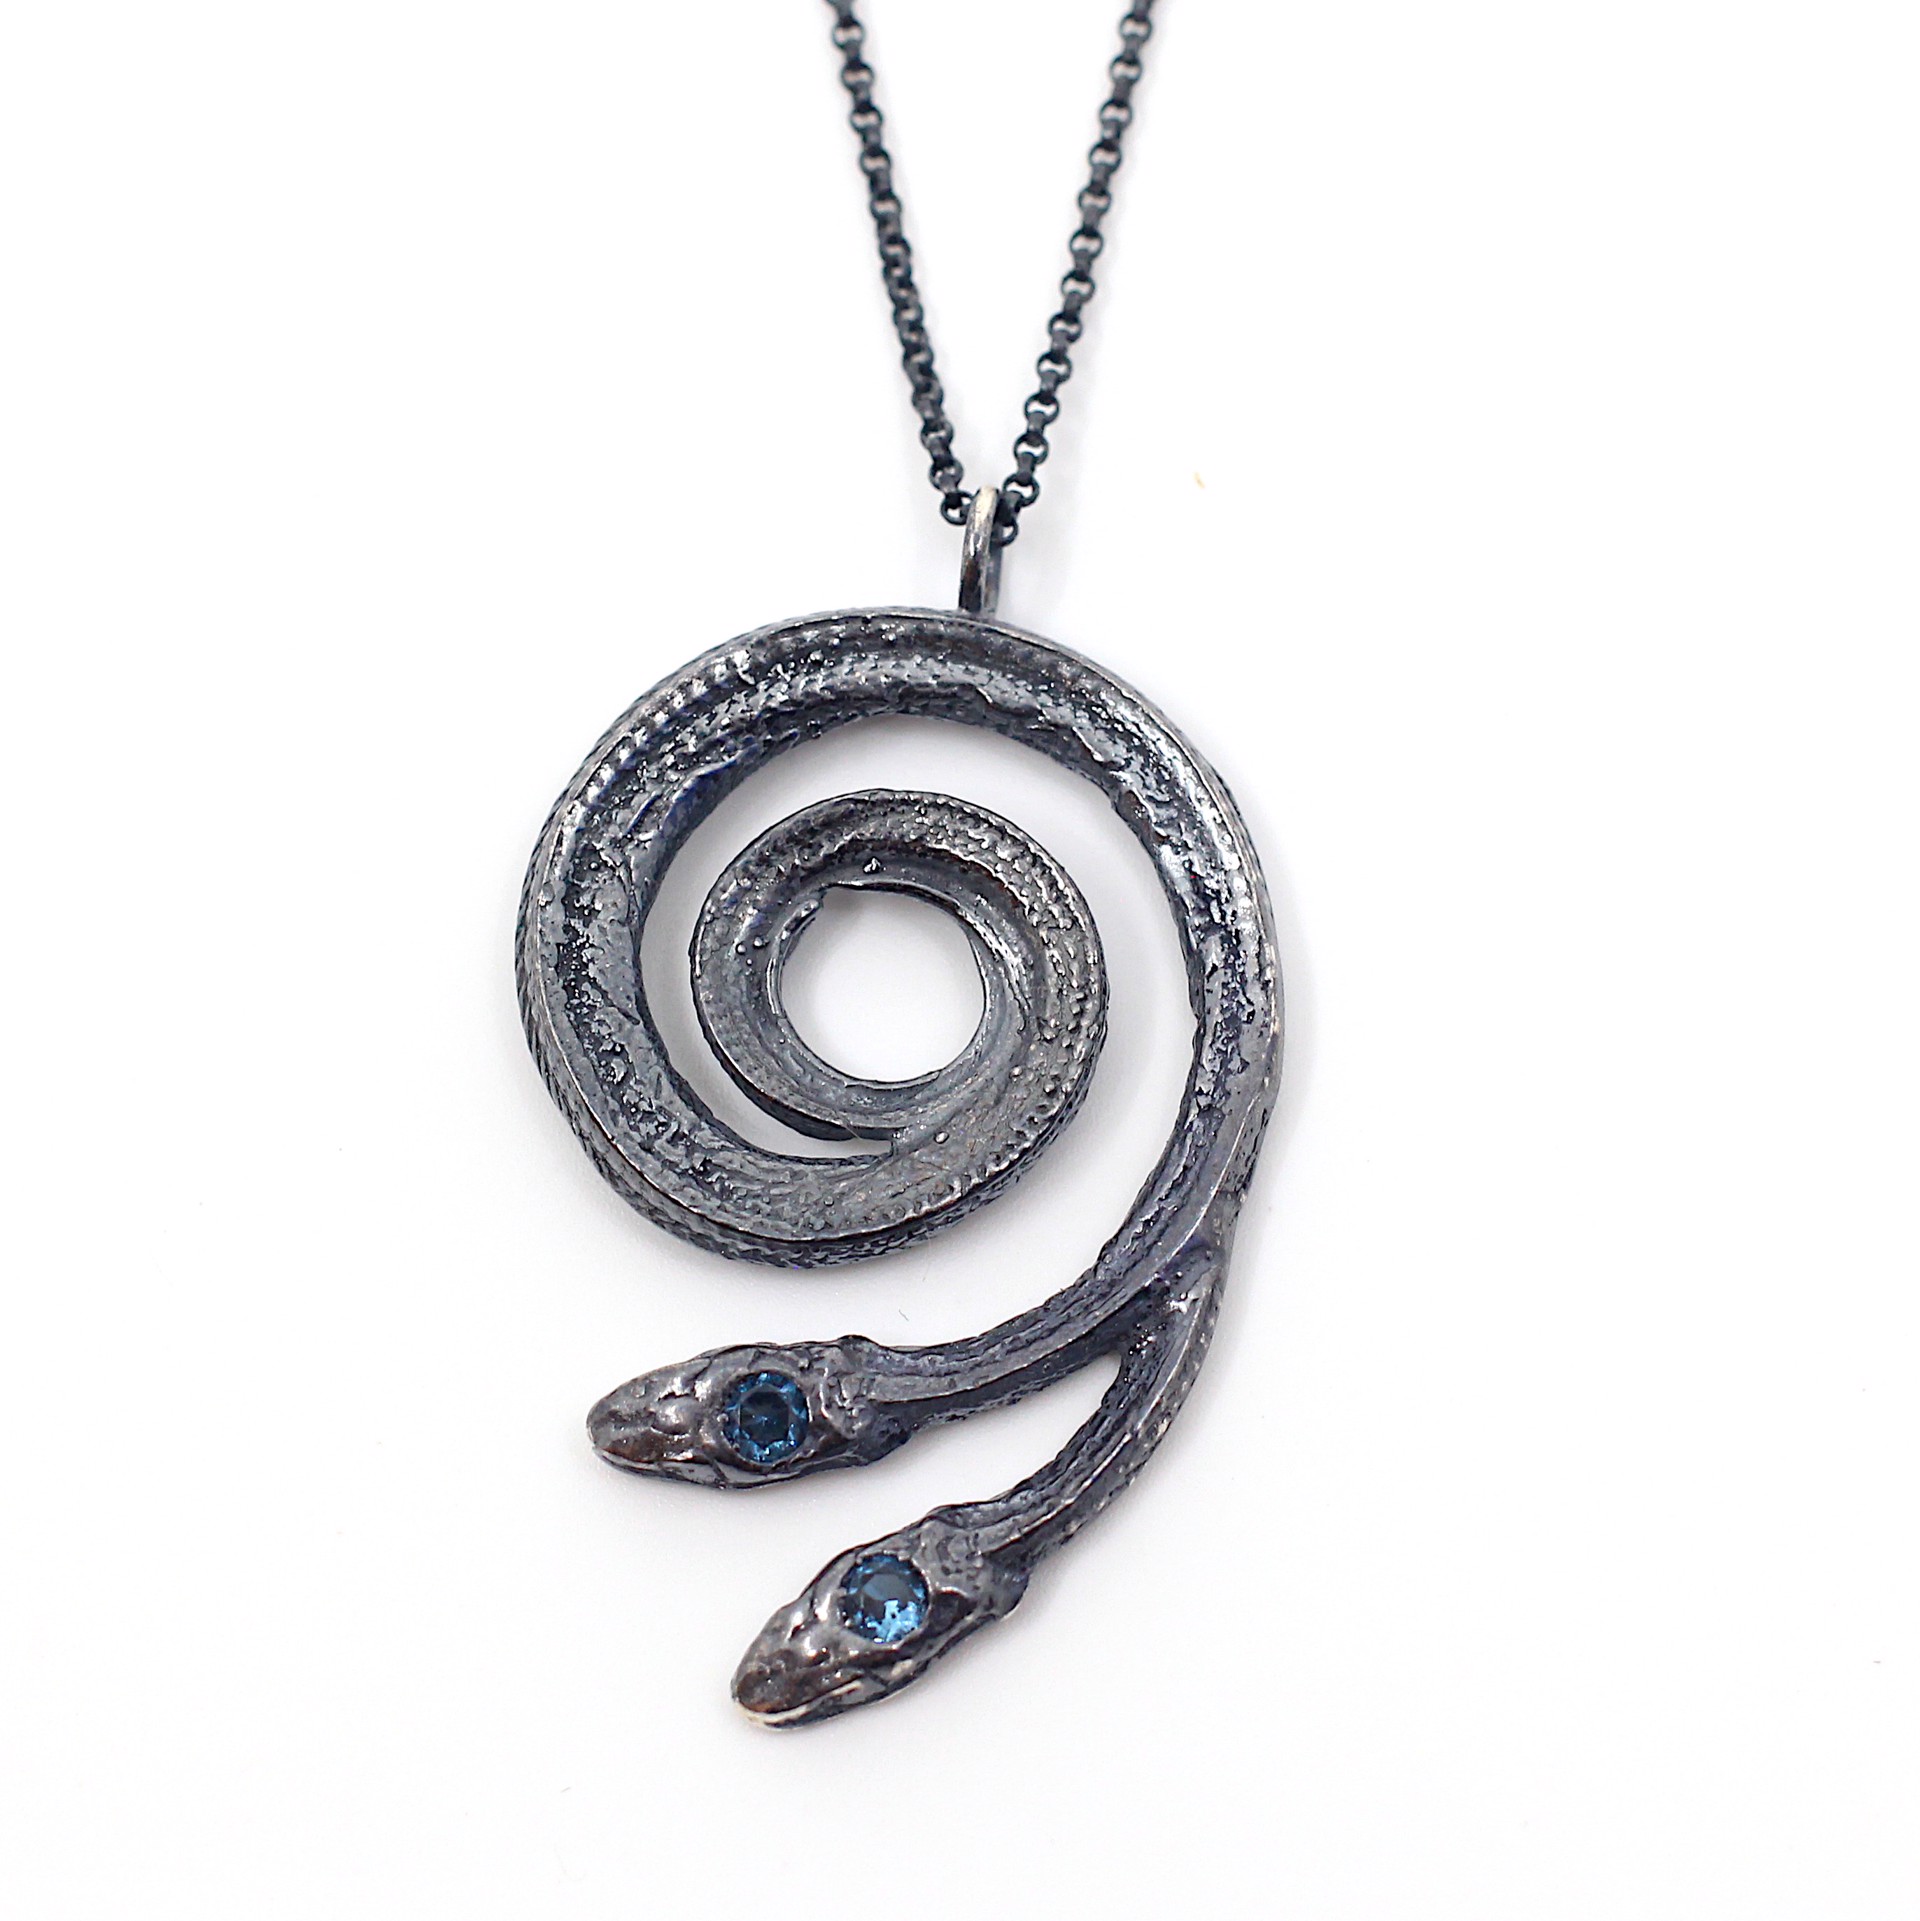 Two-Headed Serpentine Necklace by Anna Johnson